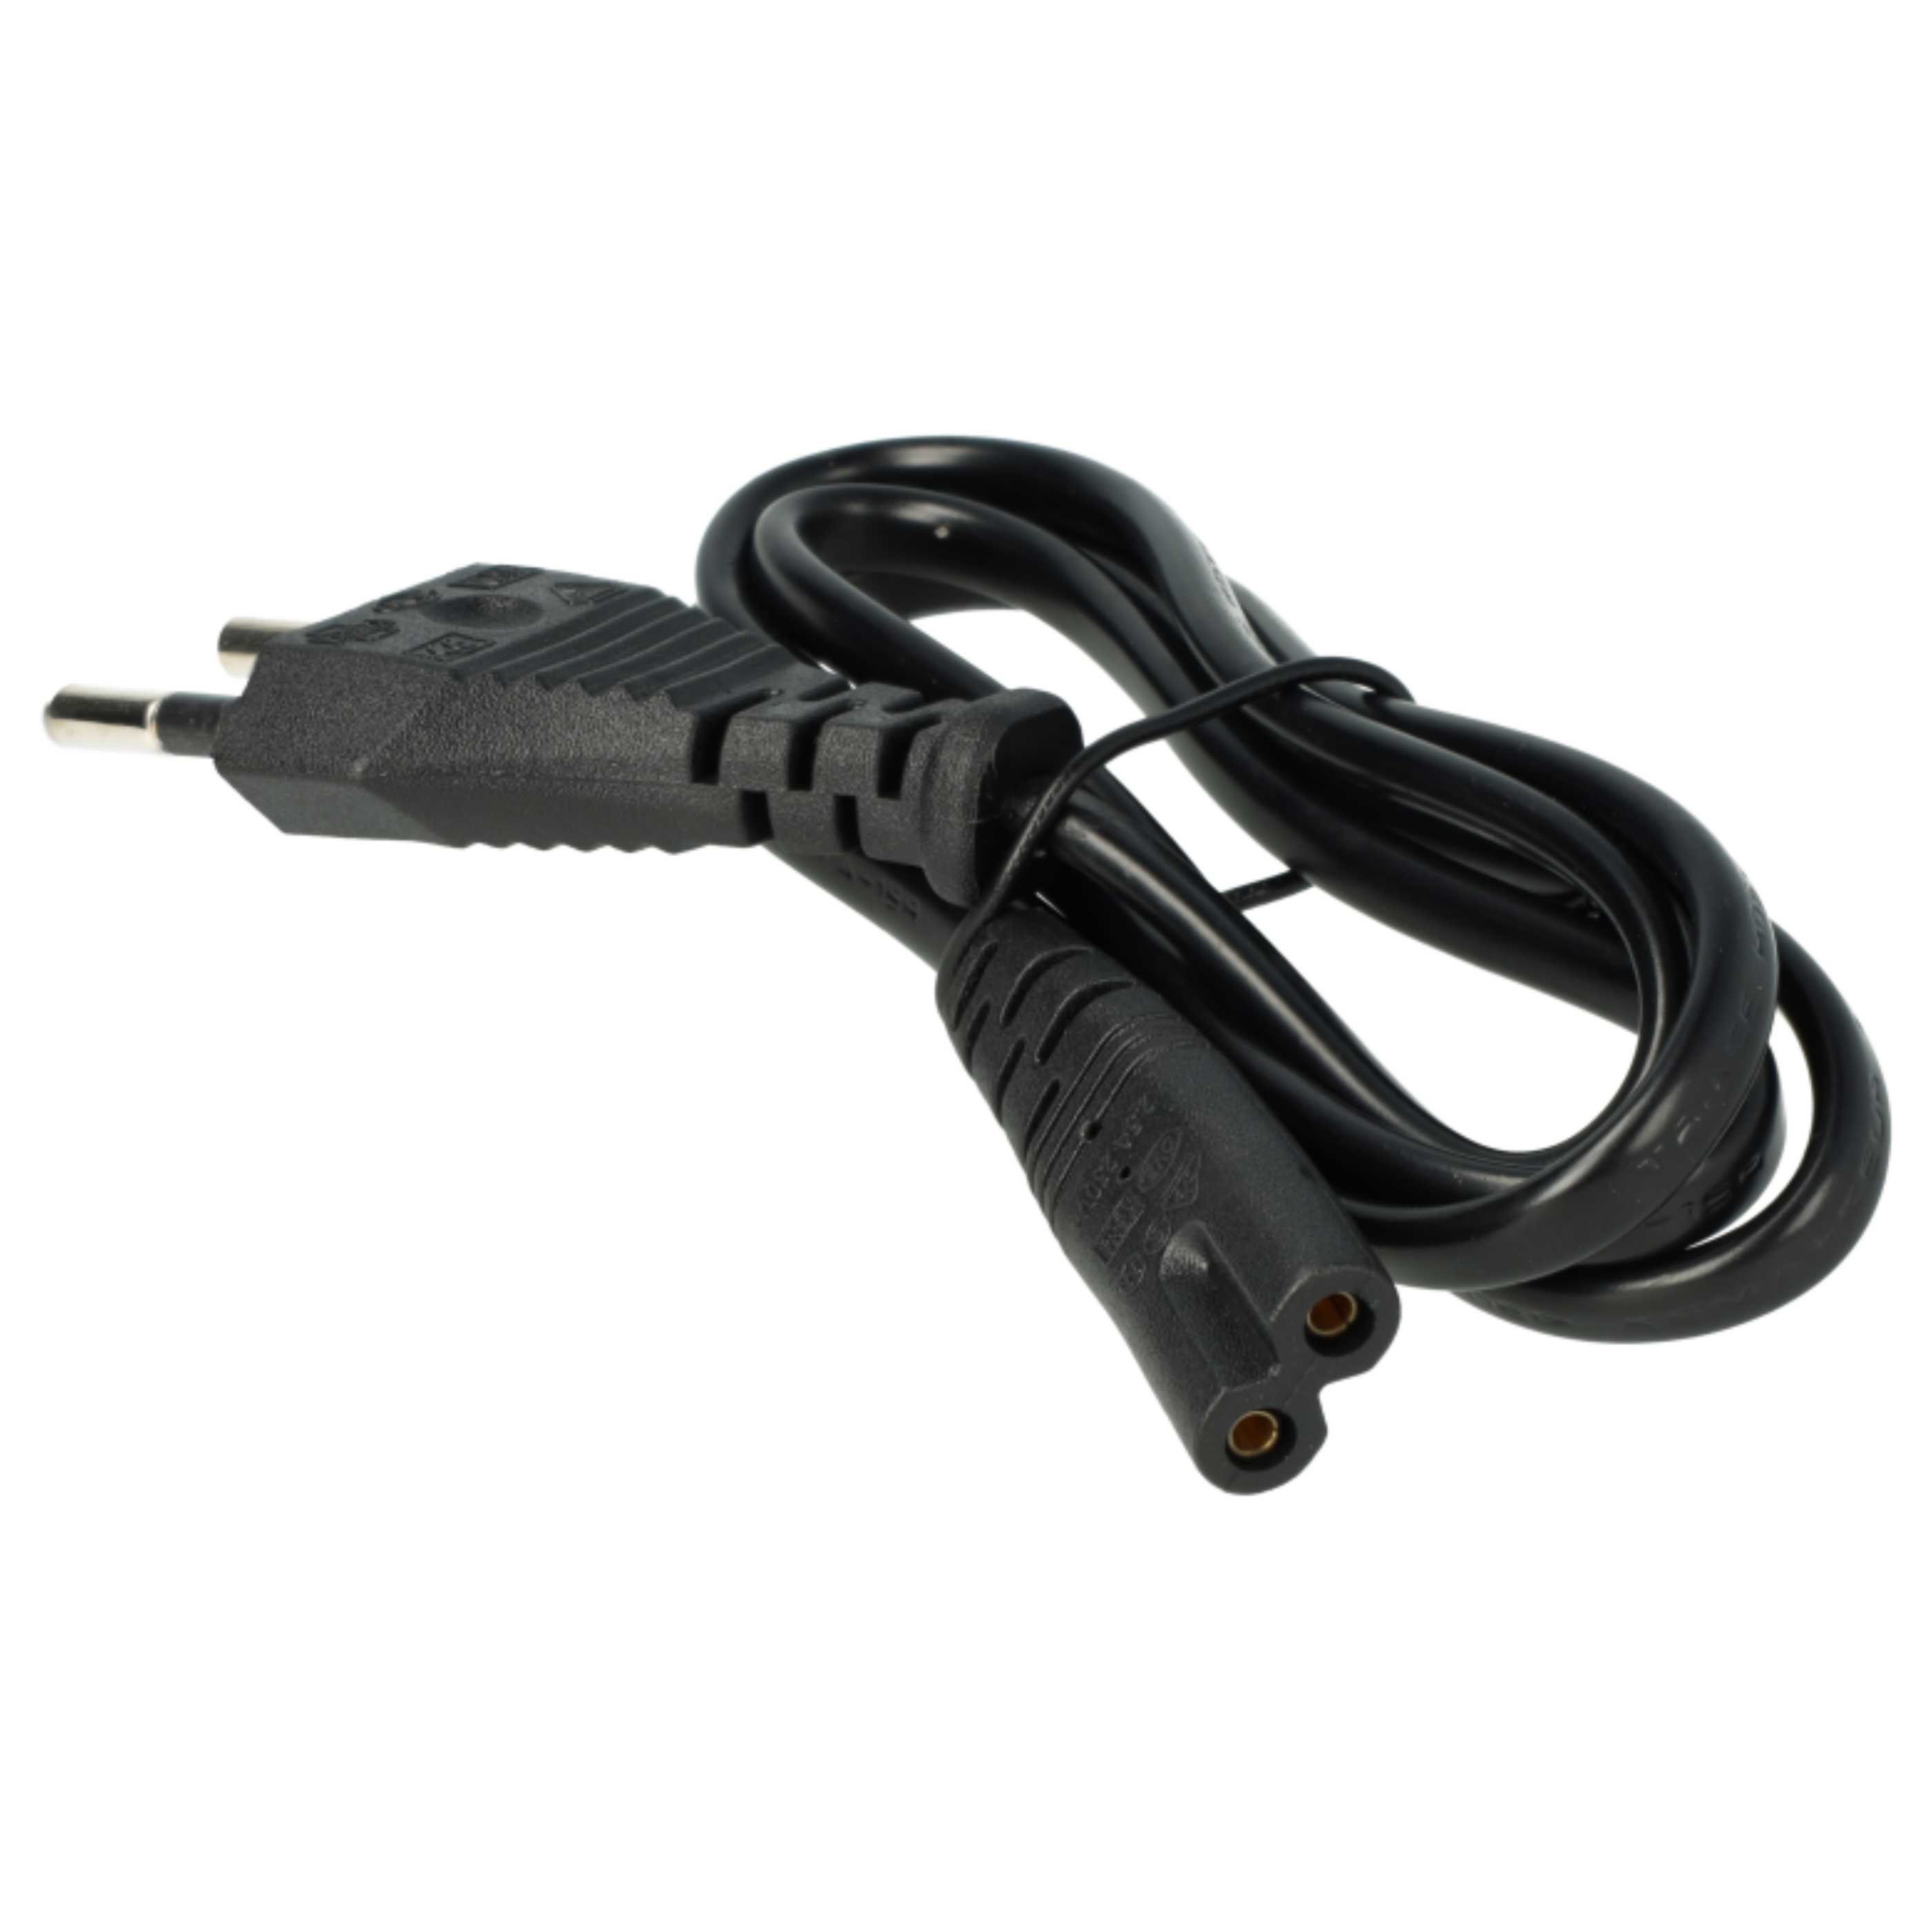 Mains Power Adapter replaces Sony SGPAC10V1, ADP-30KH for SonyNotebook, 30 W